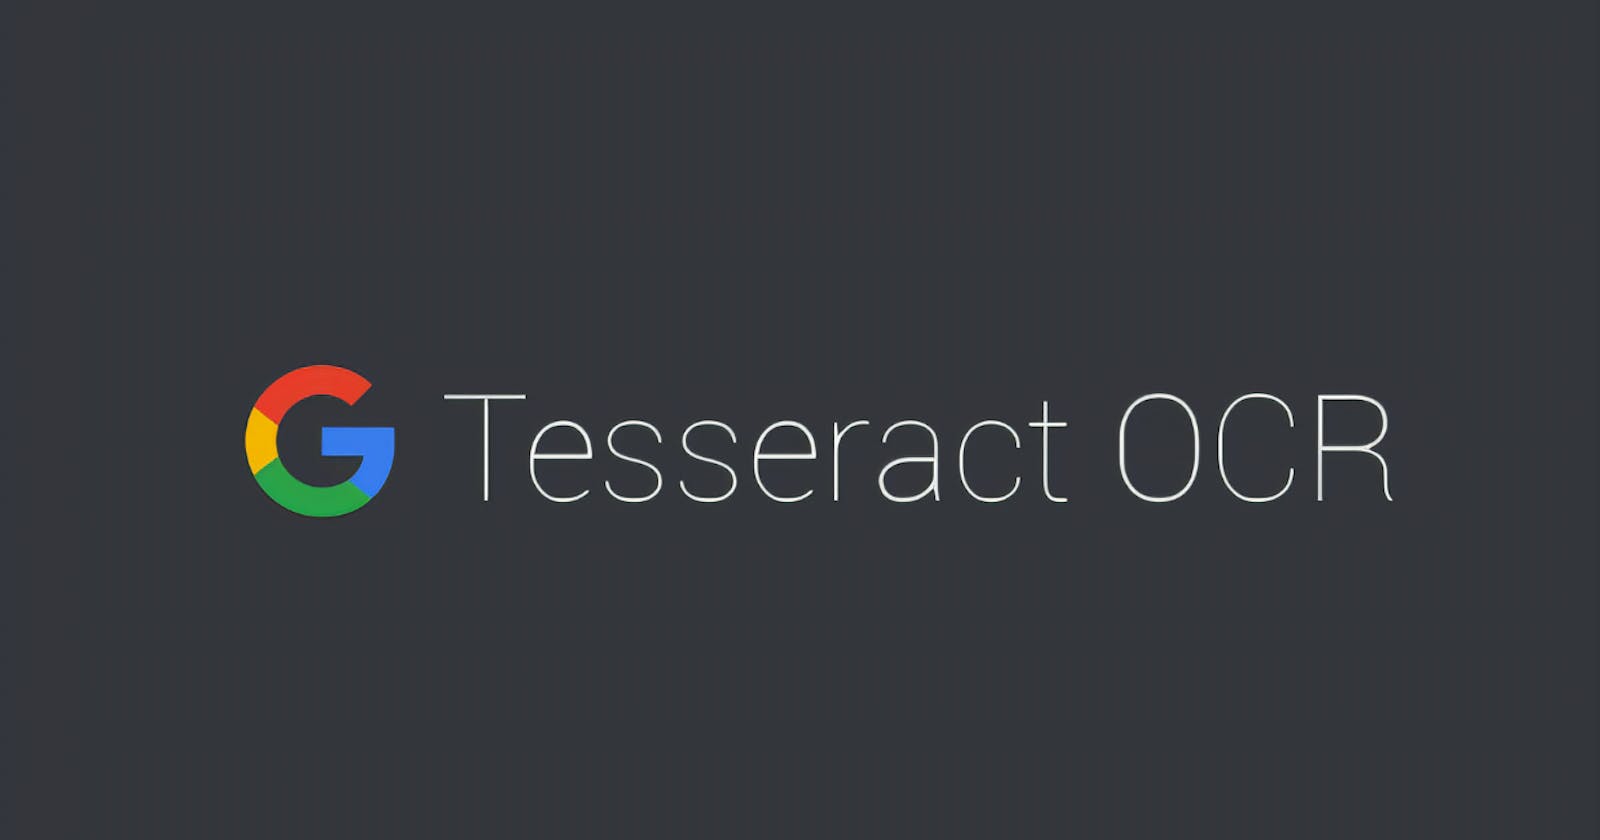 Getting Started with Optical Character Recognition (OCR) using TesseractOCR and Java